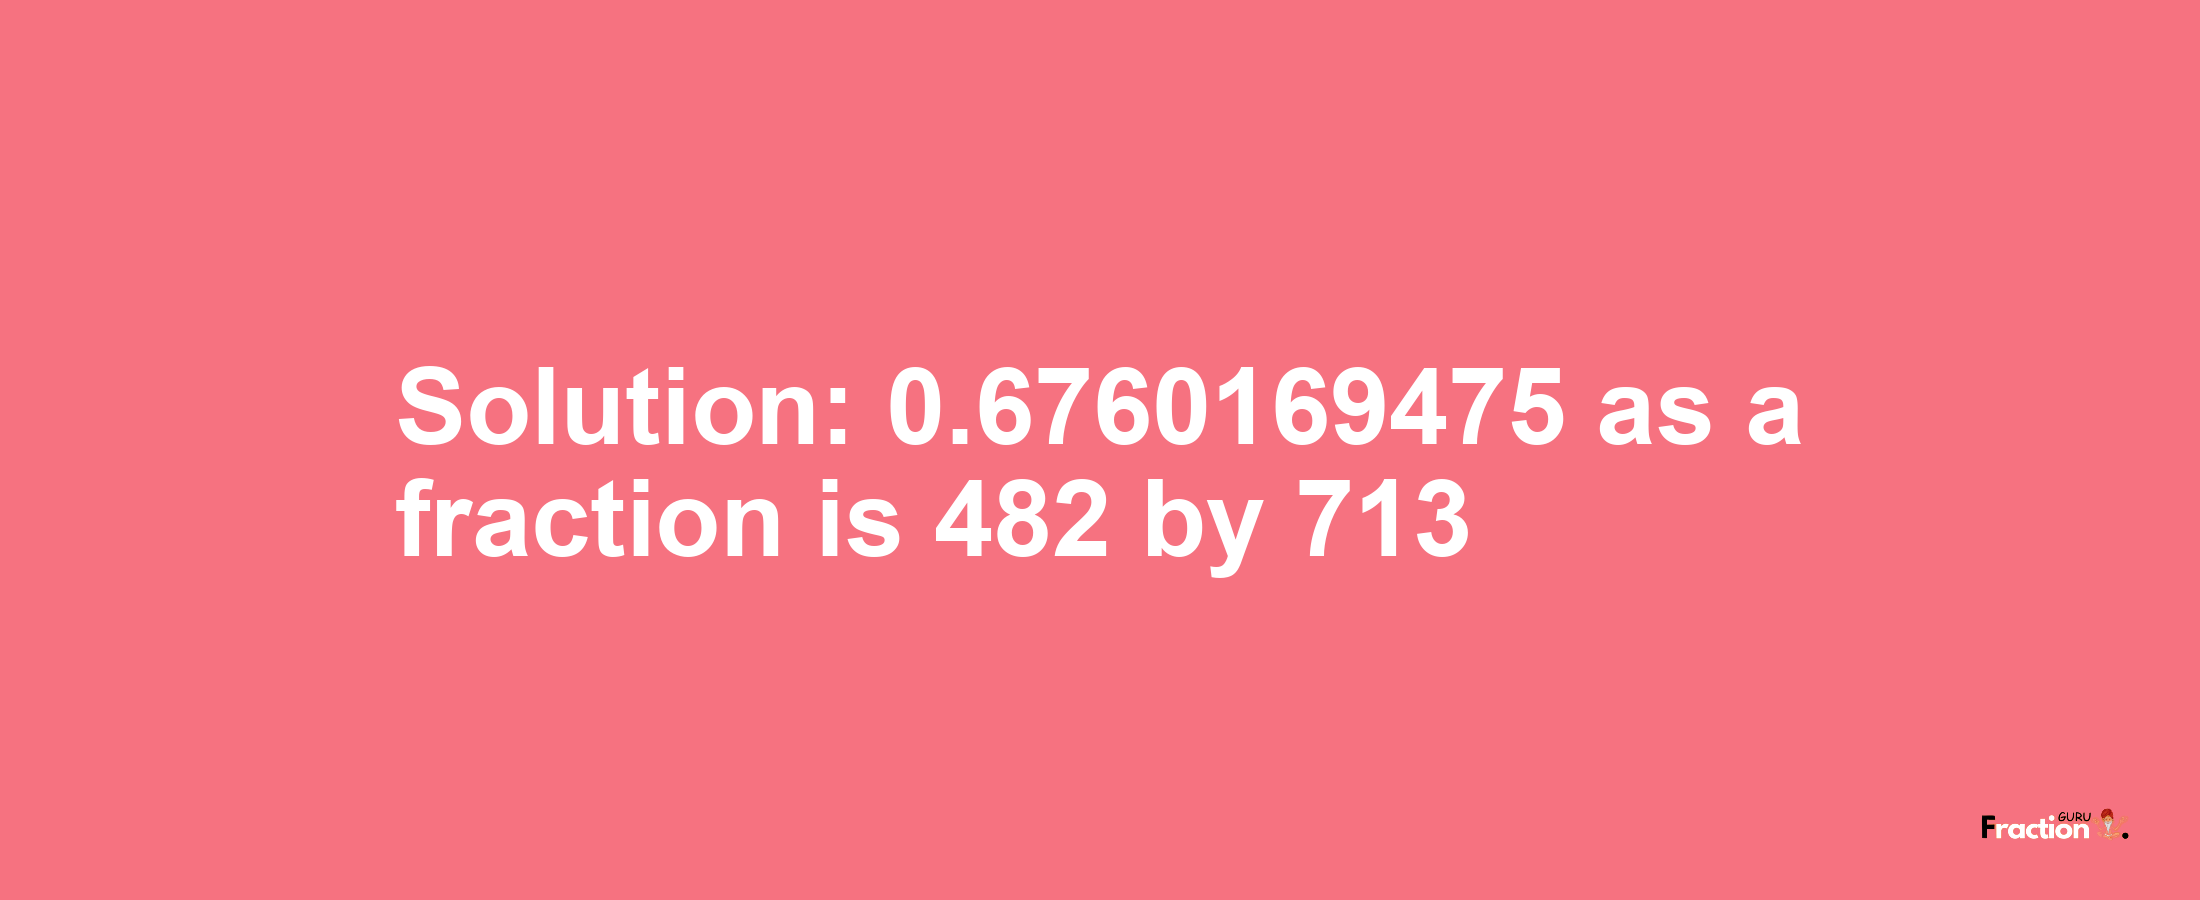 Solution:0.6760169475 as a fraction is 482/713